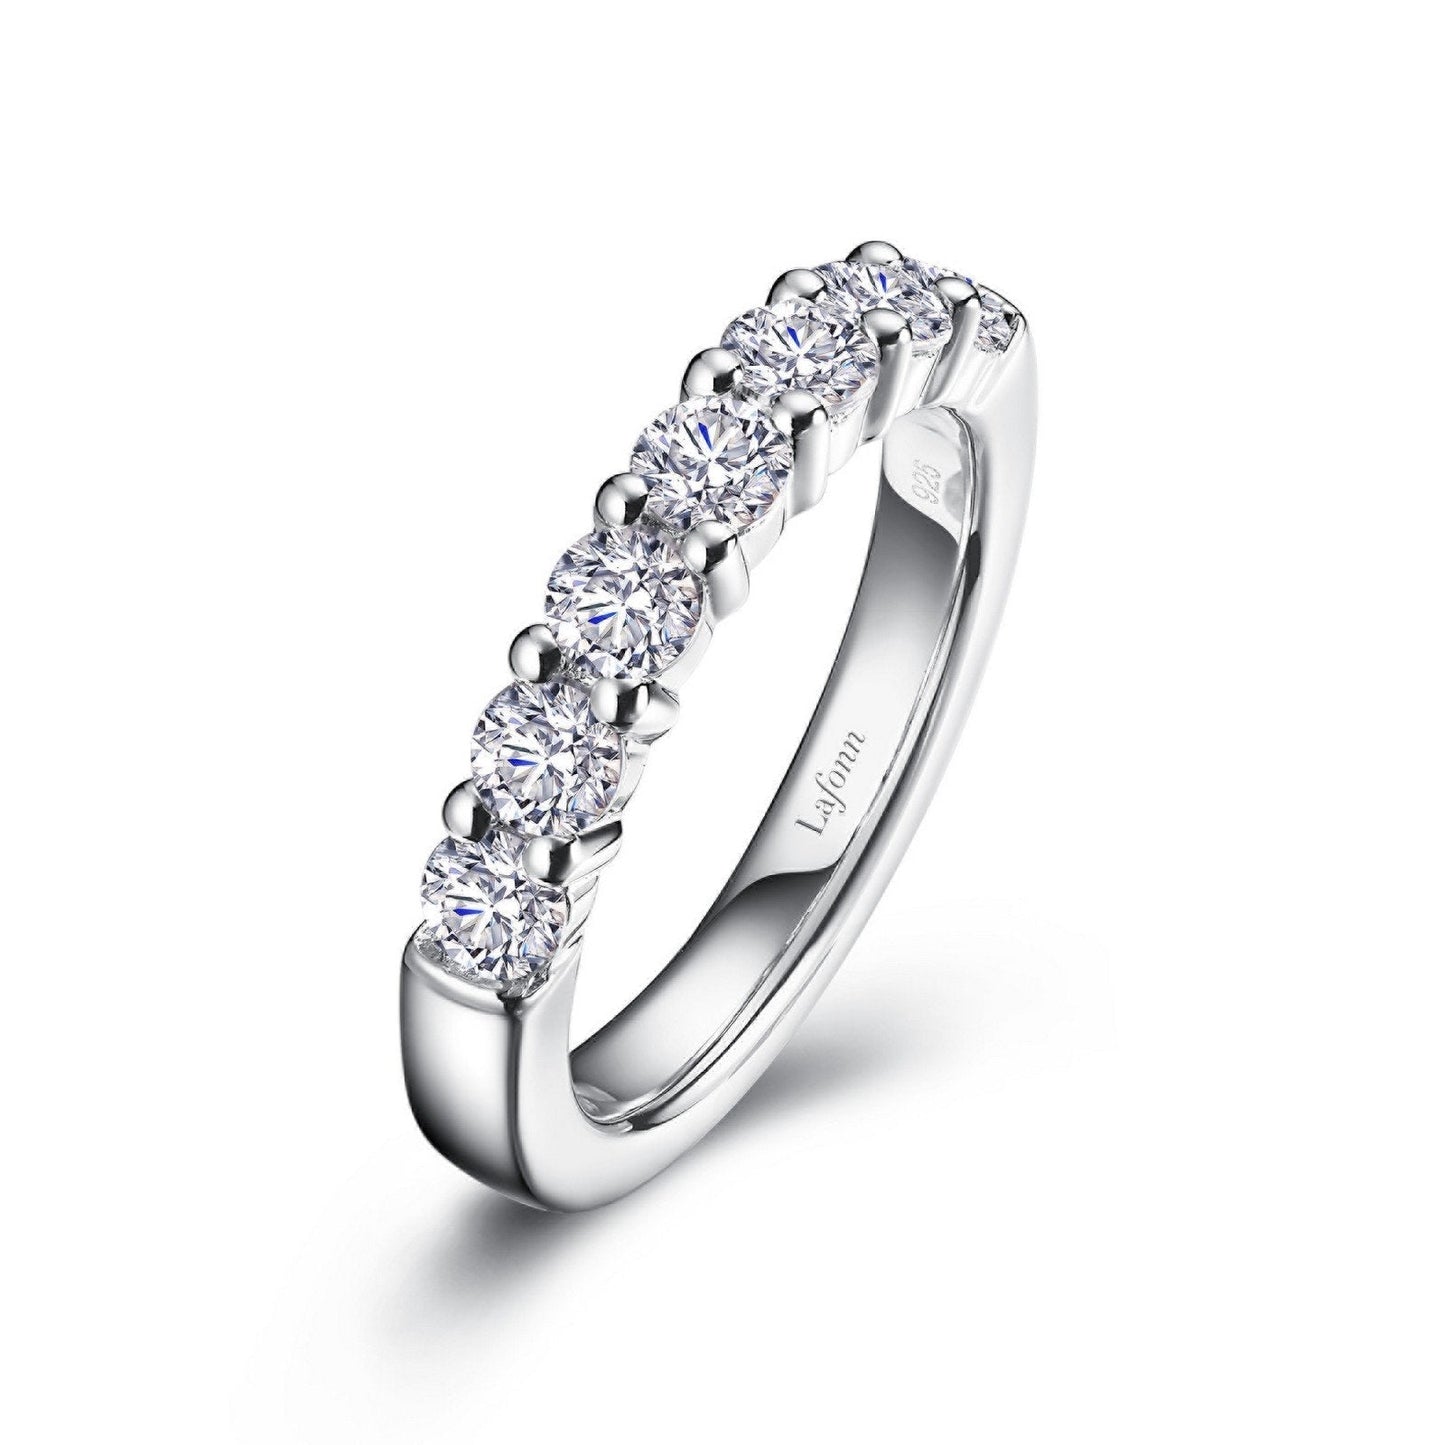 Load image into Gallery viewer, Lafonn 1.2 CTW Half-Eternity Band Simulated Diamond RINGS Size 8 Platinum 1.2 CTS Approx. 3.5mm (W)
